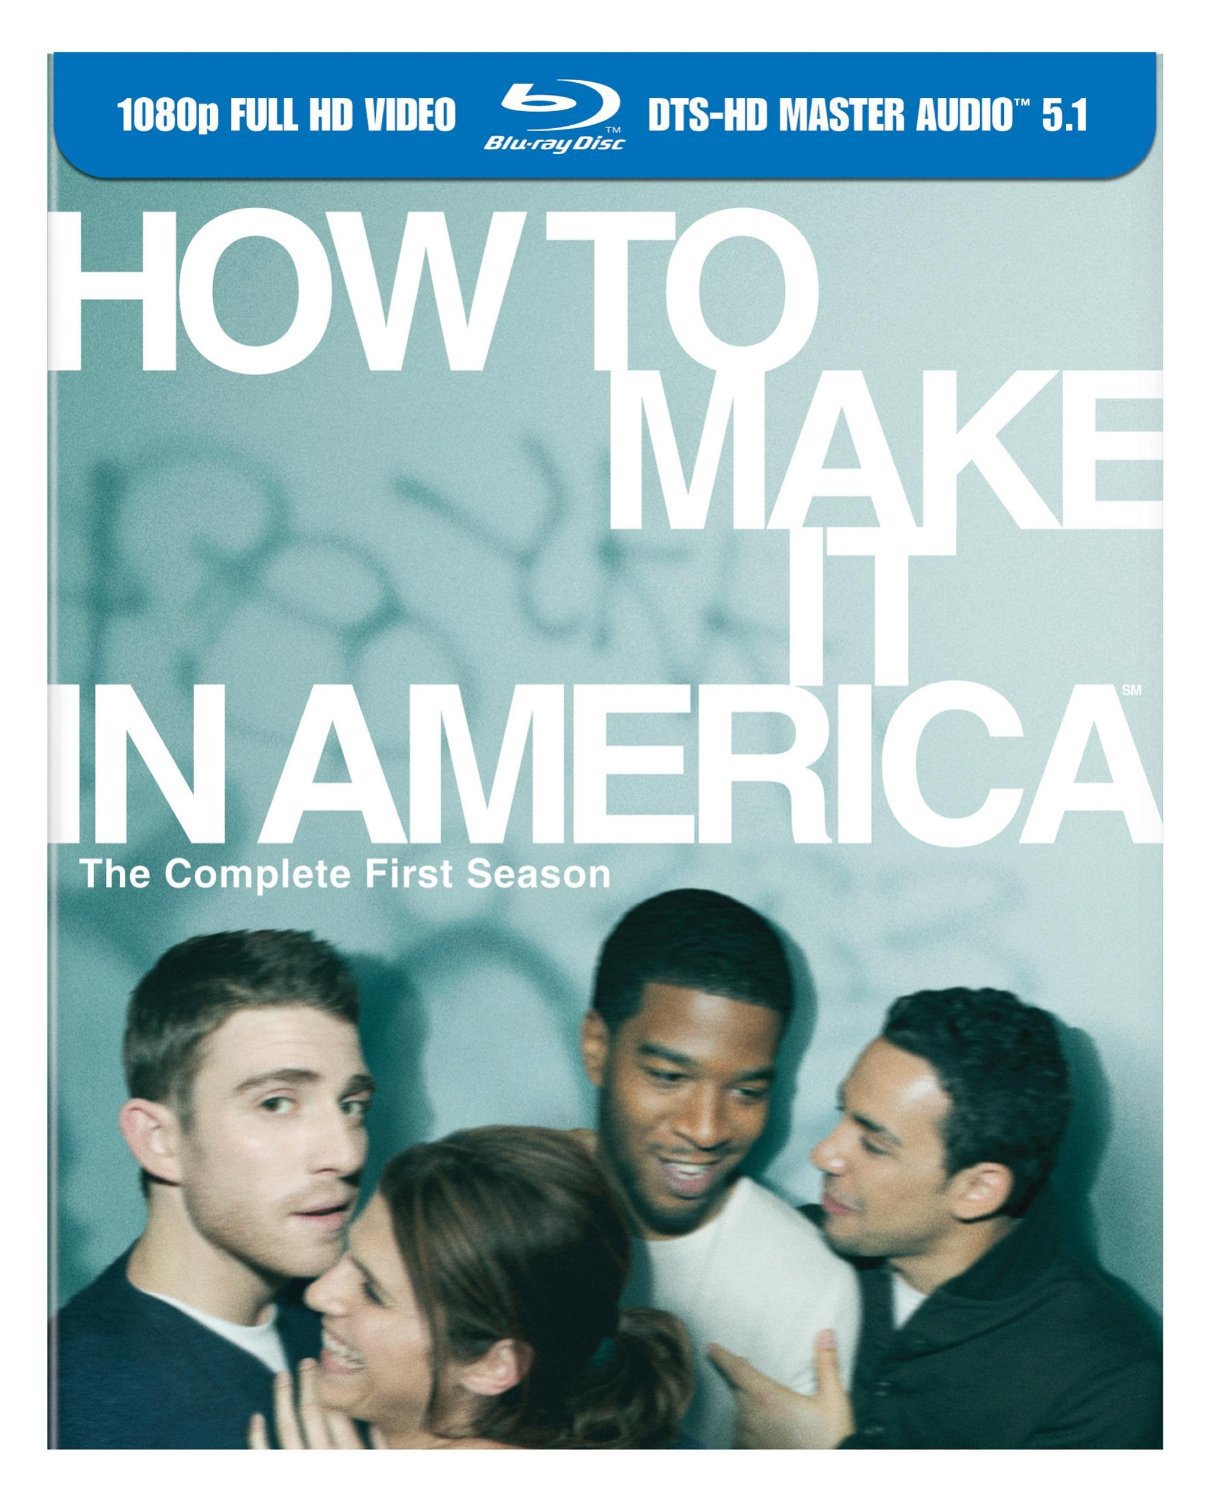 How to Make It In America